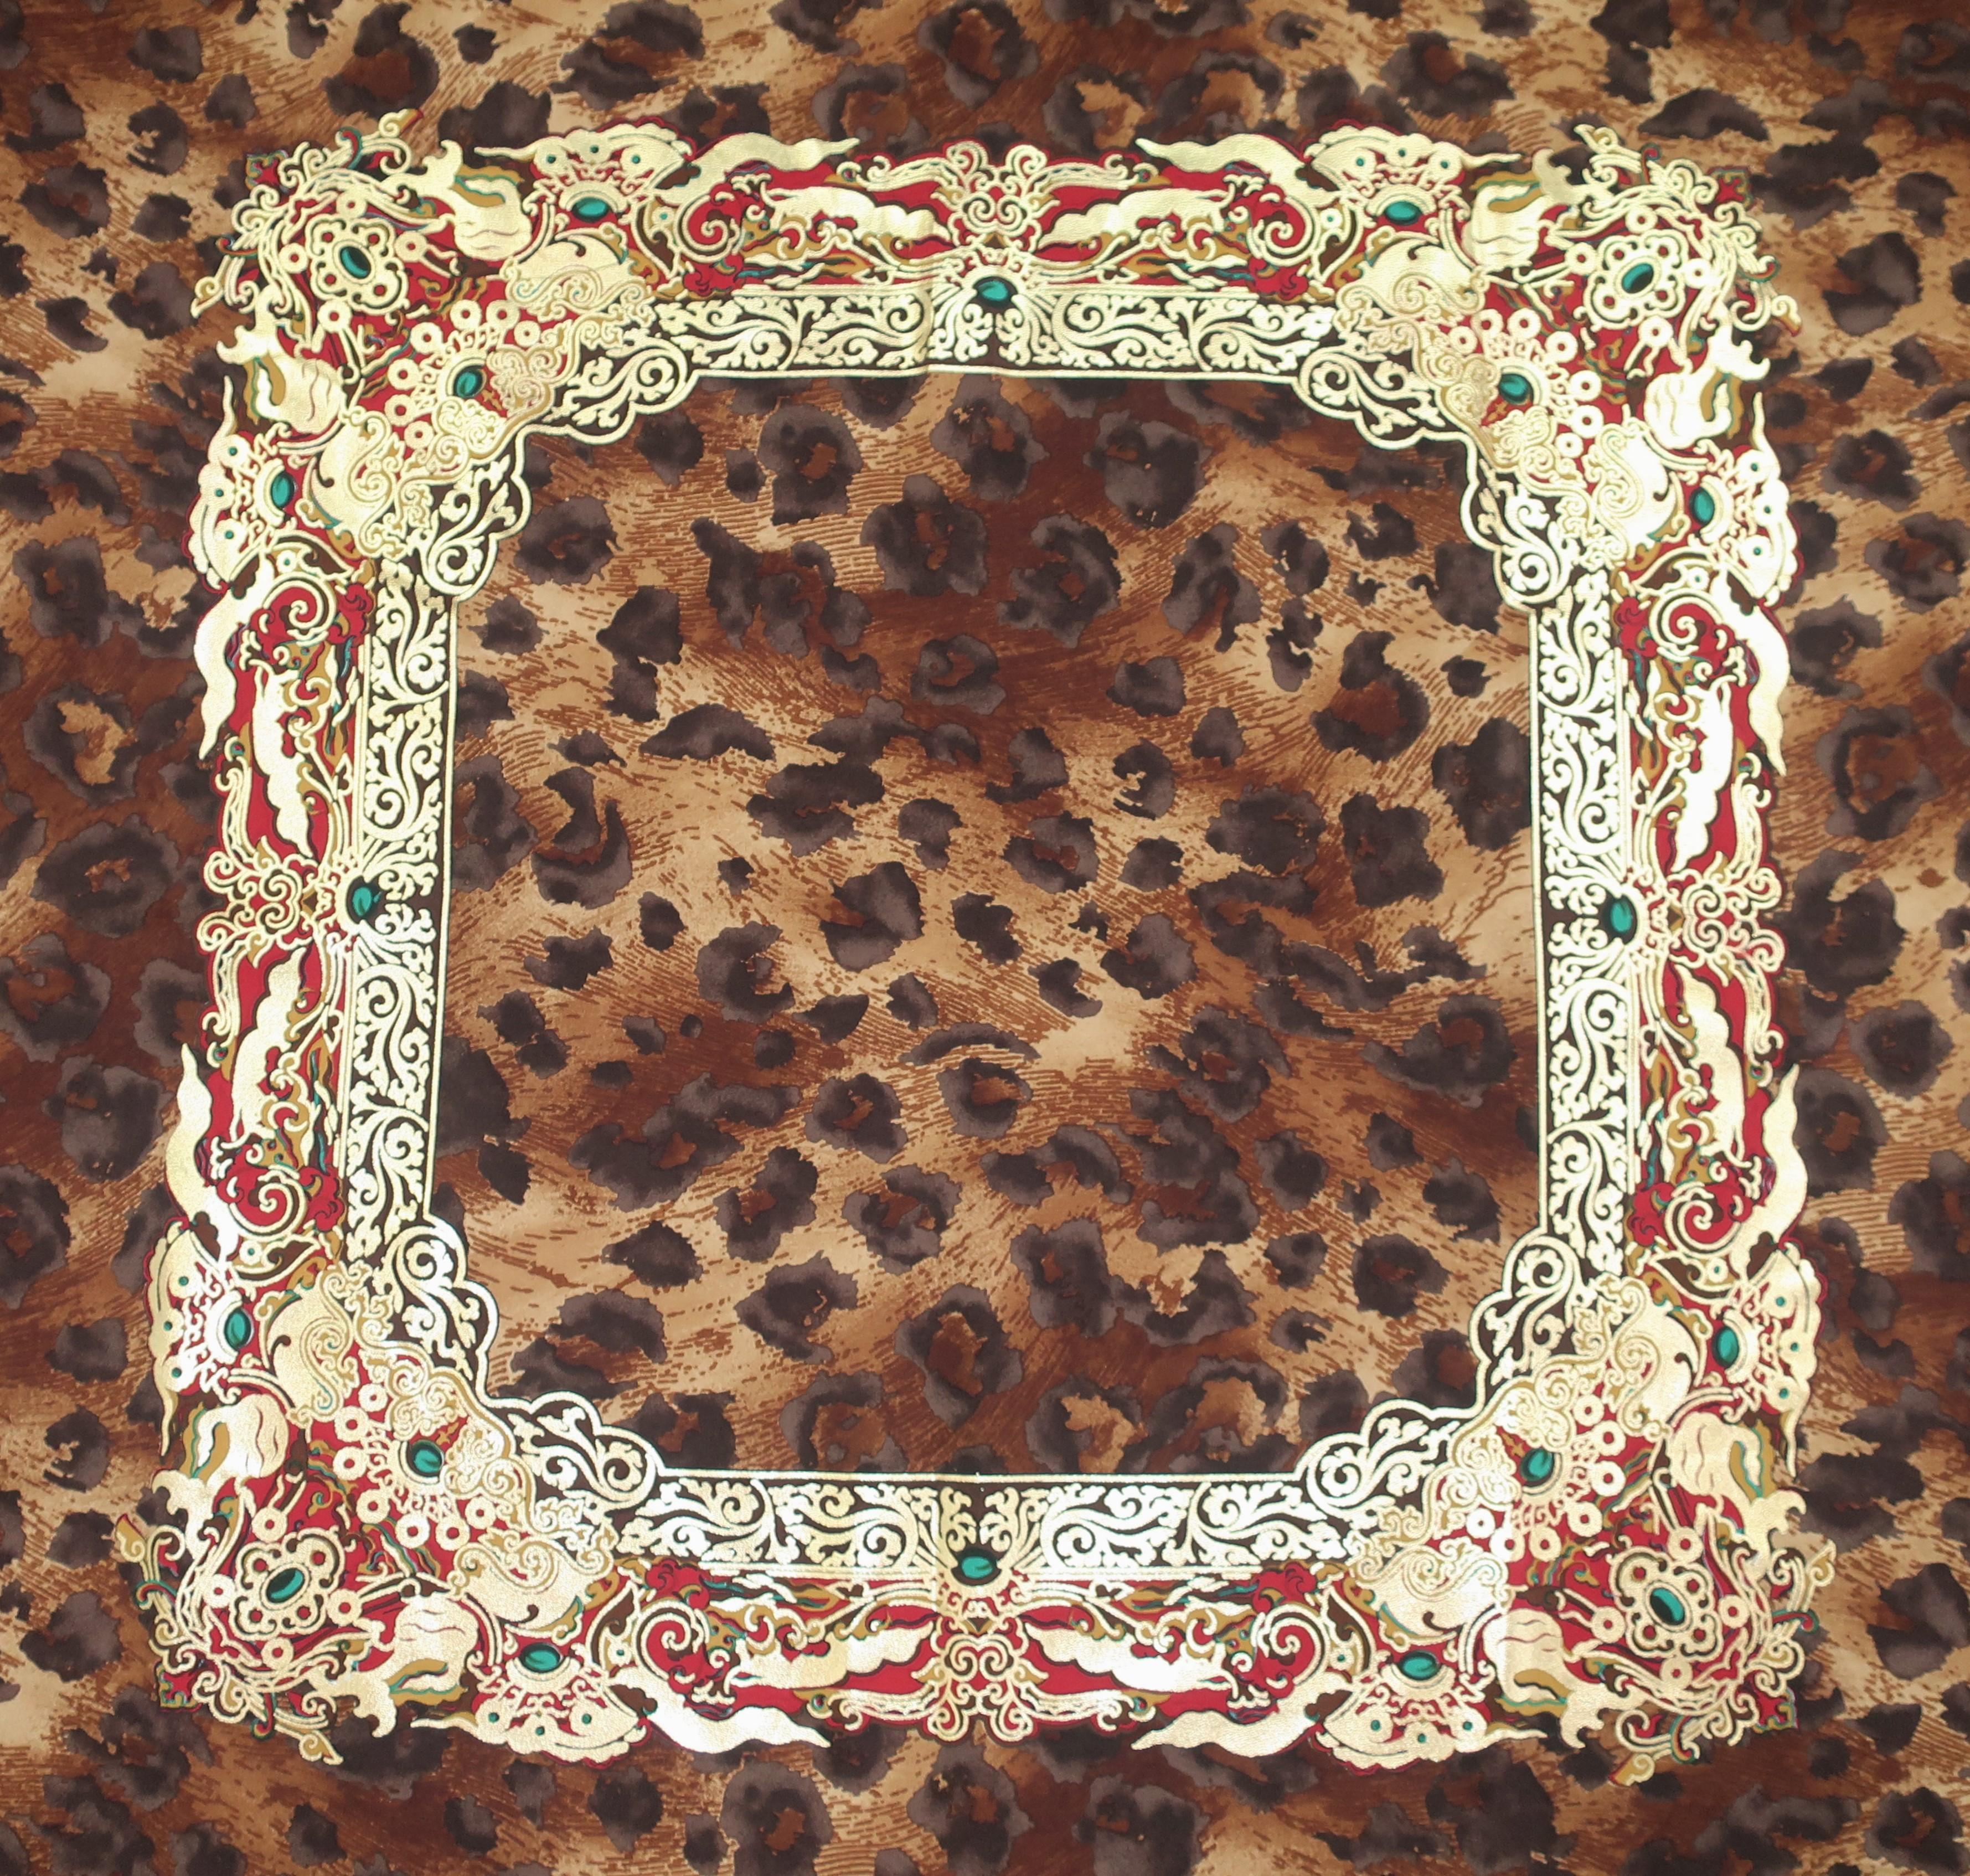 This Gianfranco Ferre silk scarf is impressive in more ways than one.  The large scale is the perfect backdrop for a brown leopard print with an eye catching gold framed accent at the center embellished with touches of emerald green and red.  The